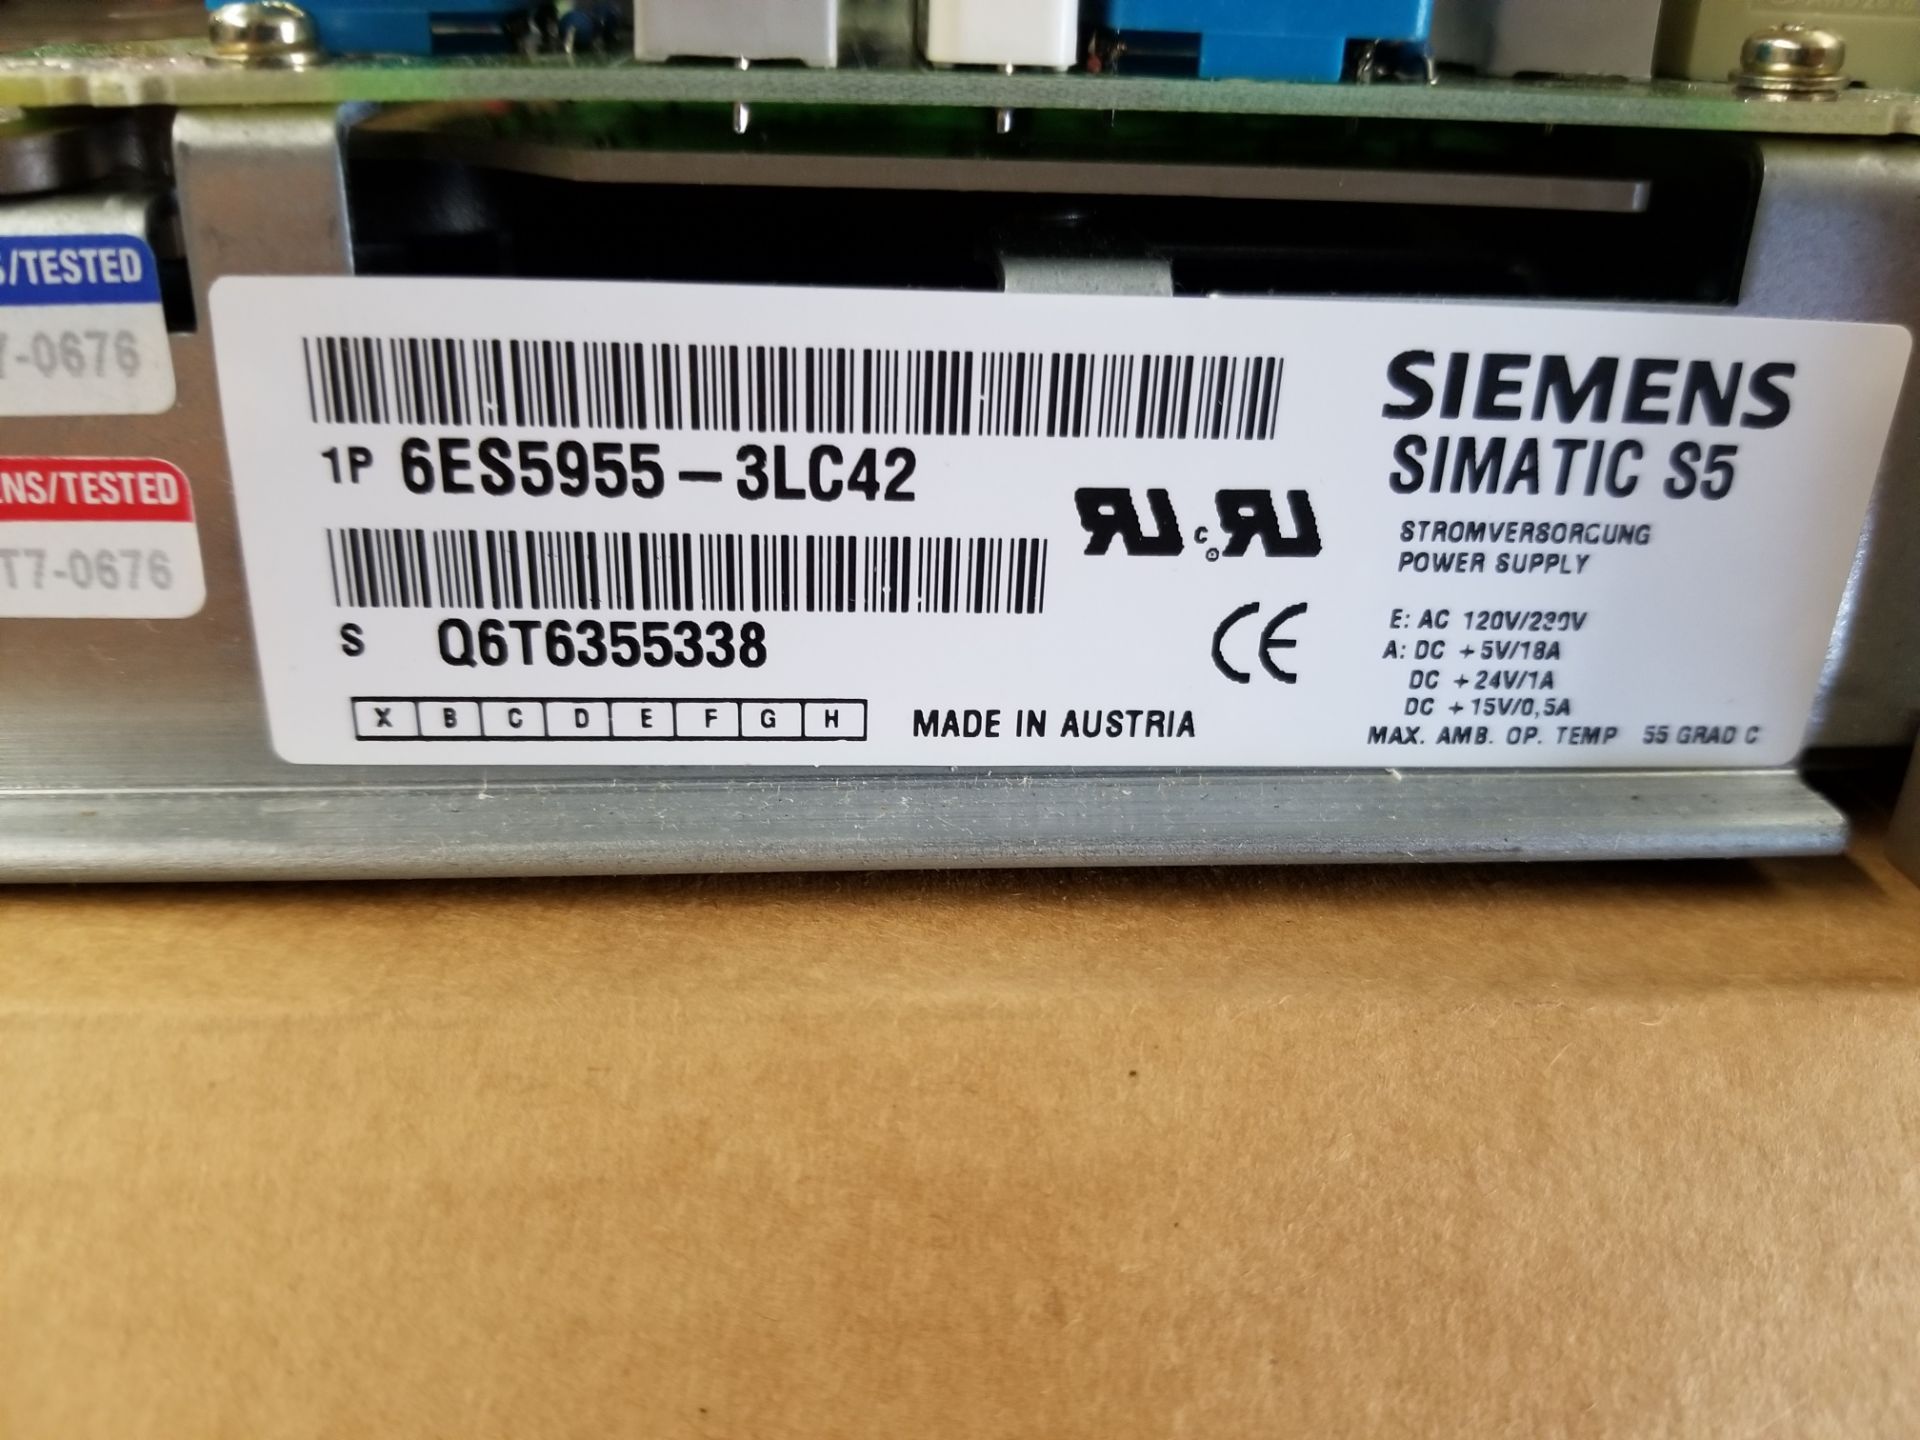 NEW SIEMENS SIMATIC S5 PLC POWER SUPPLY - Image 4 of 4